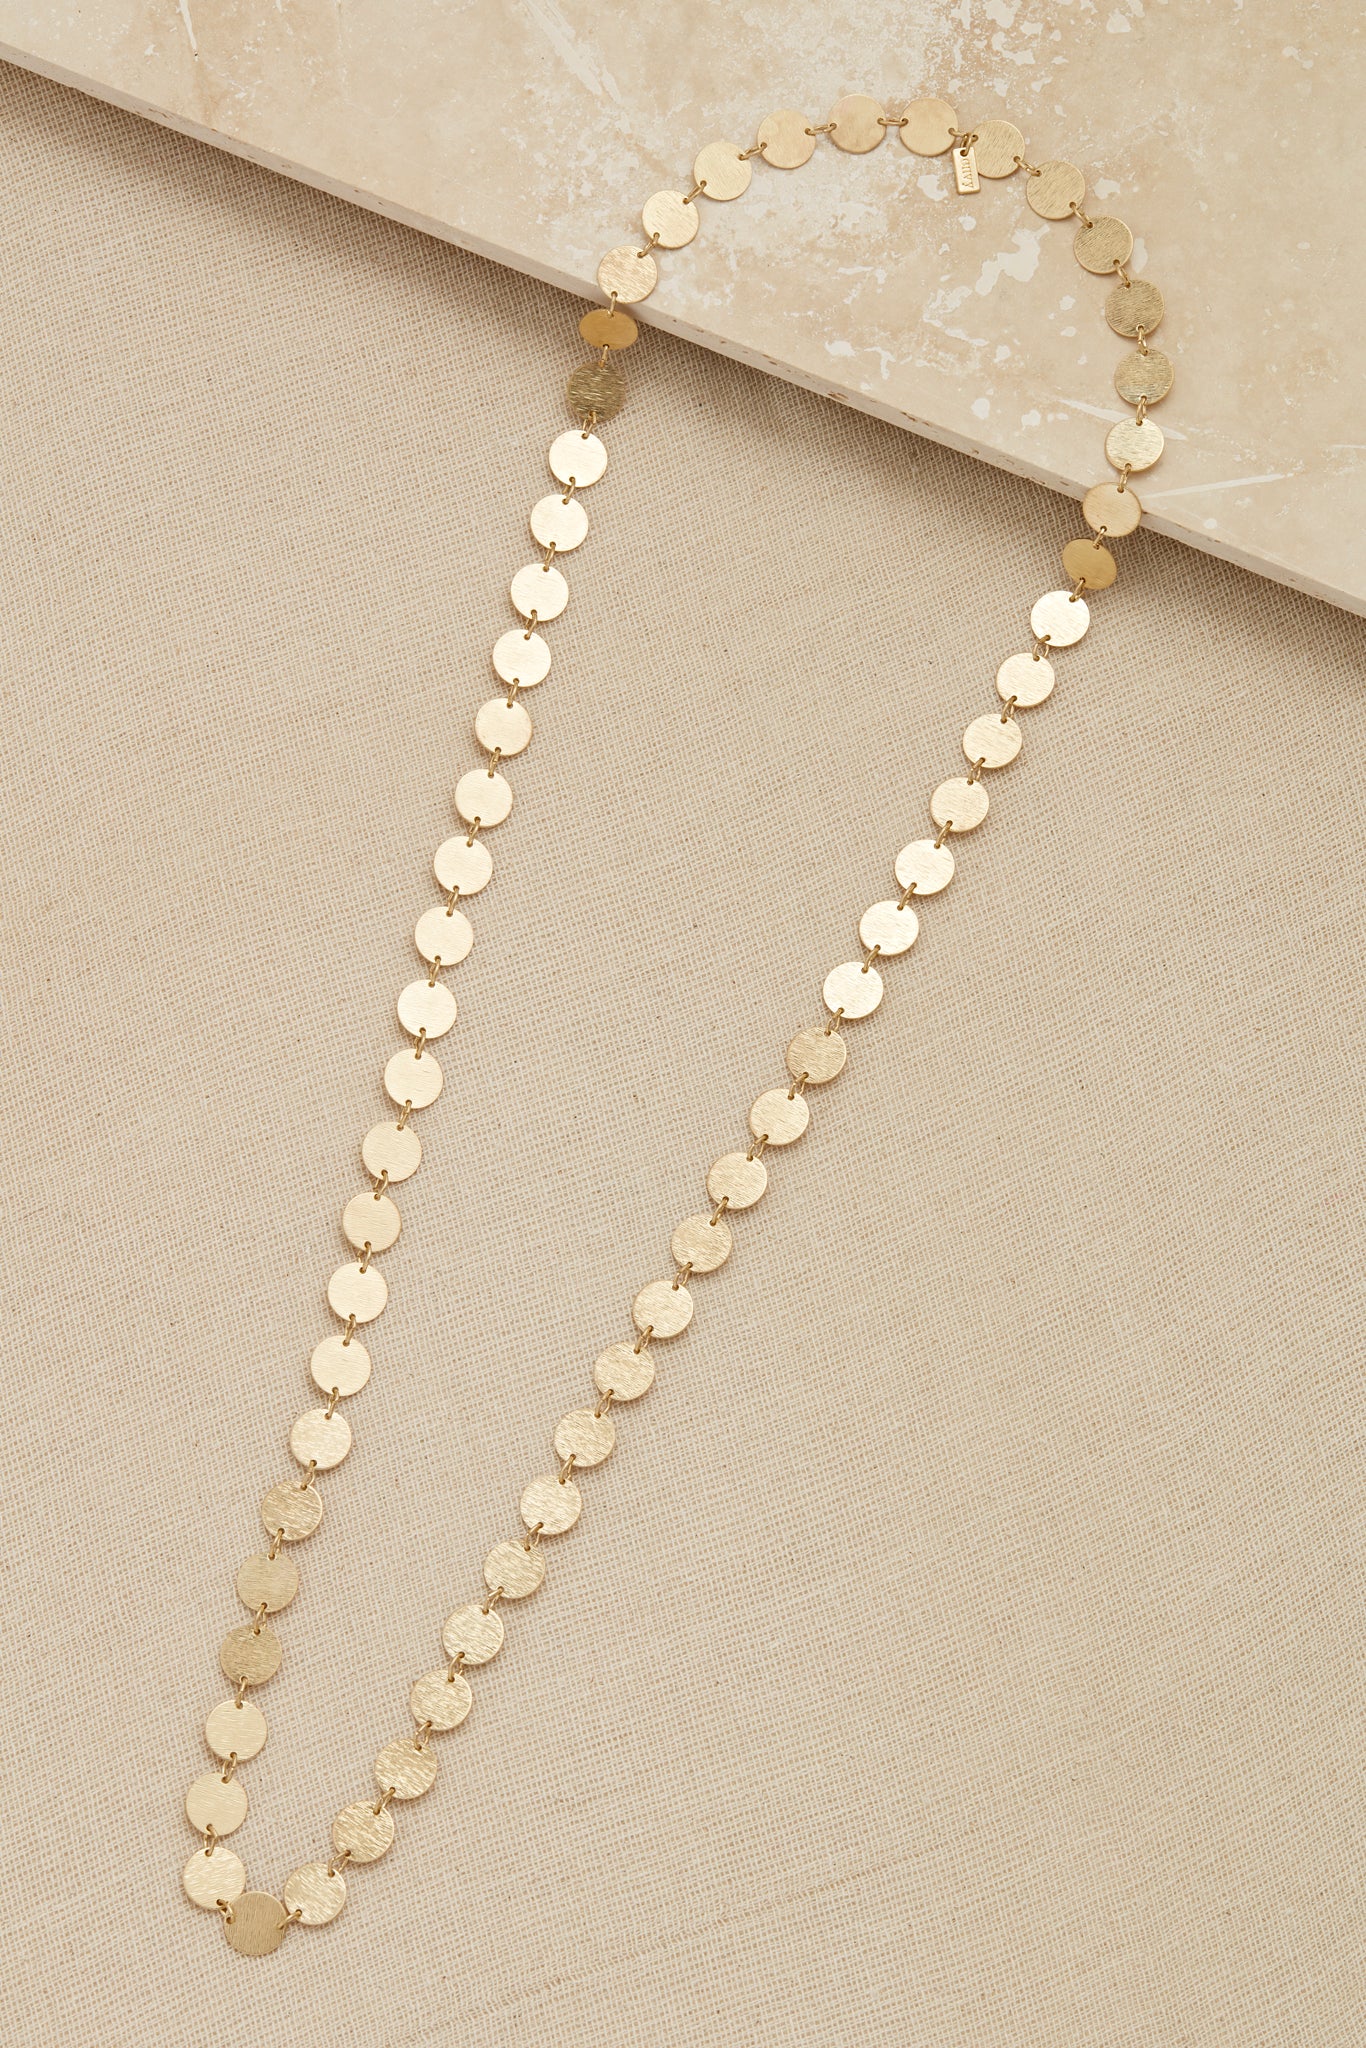 Long Gold Necklace with Circular Links